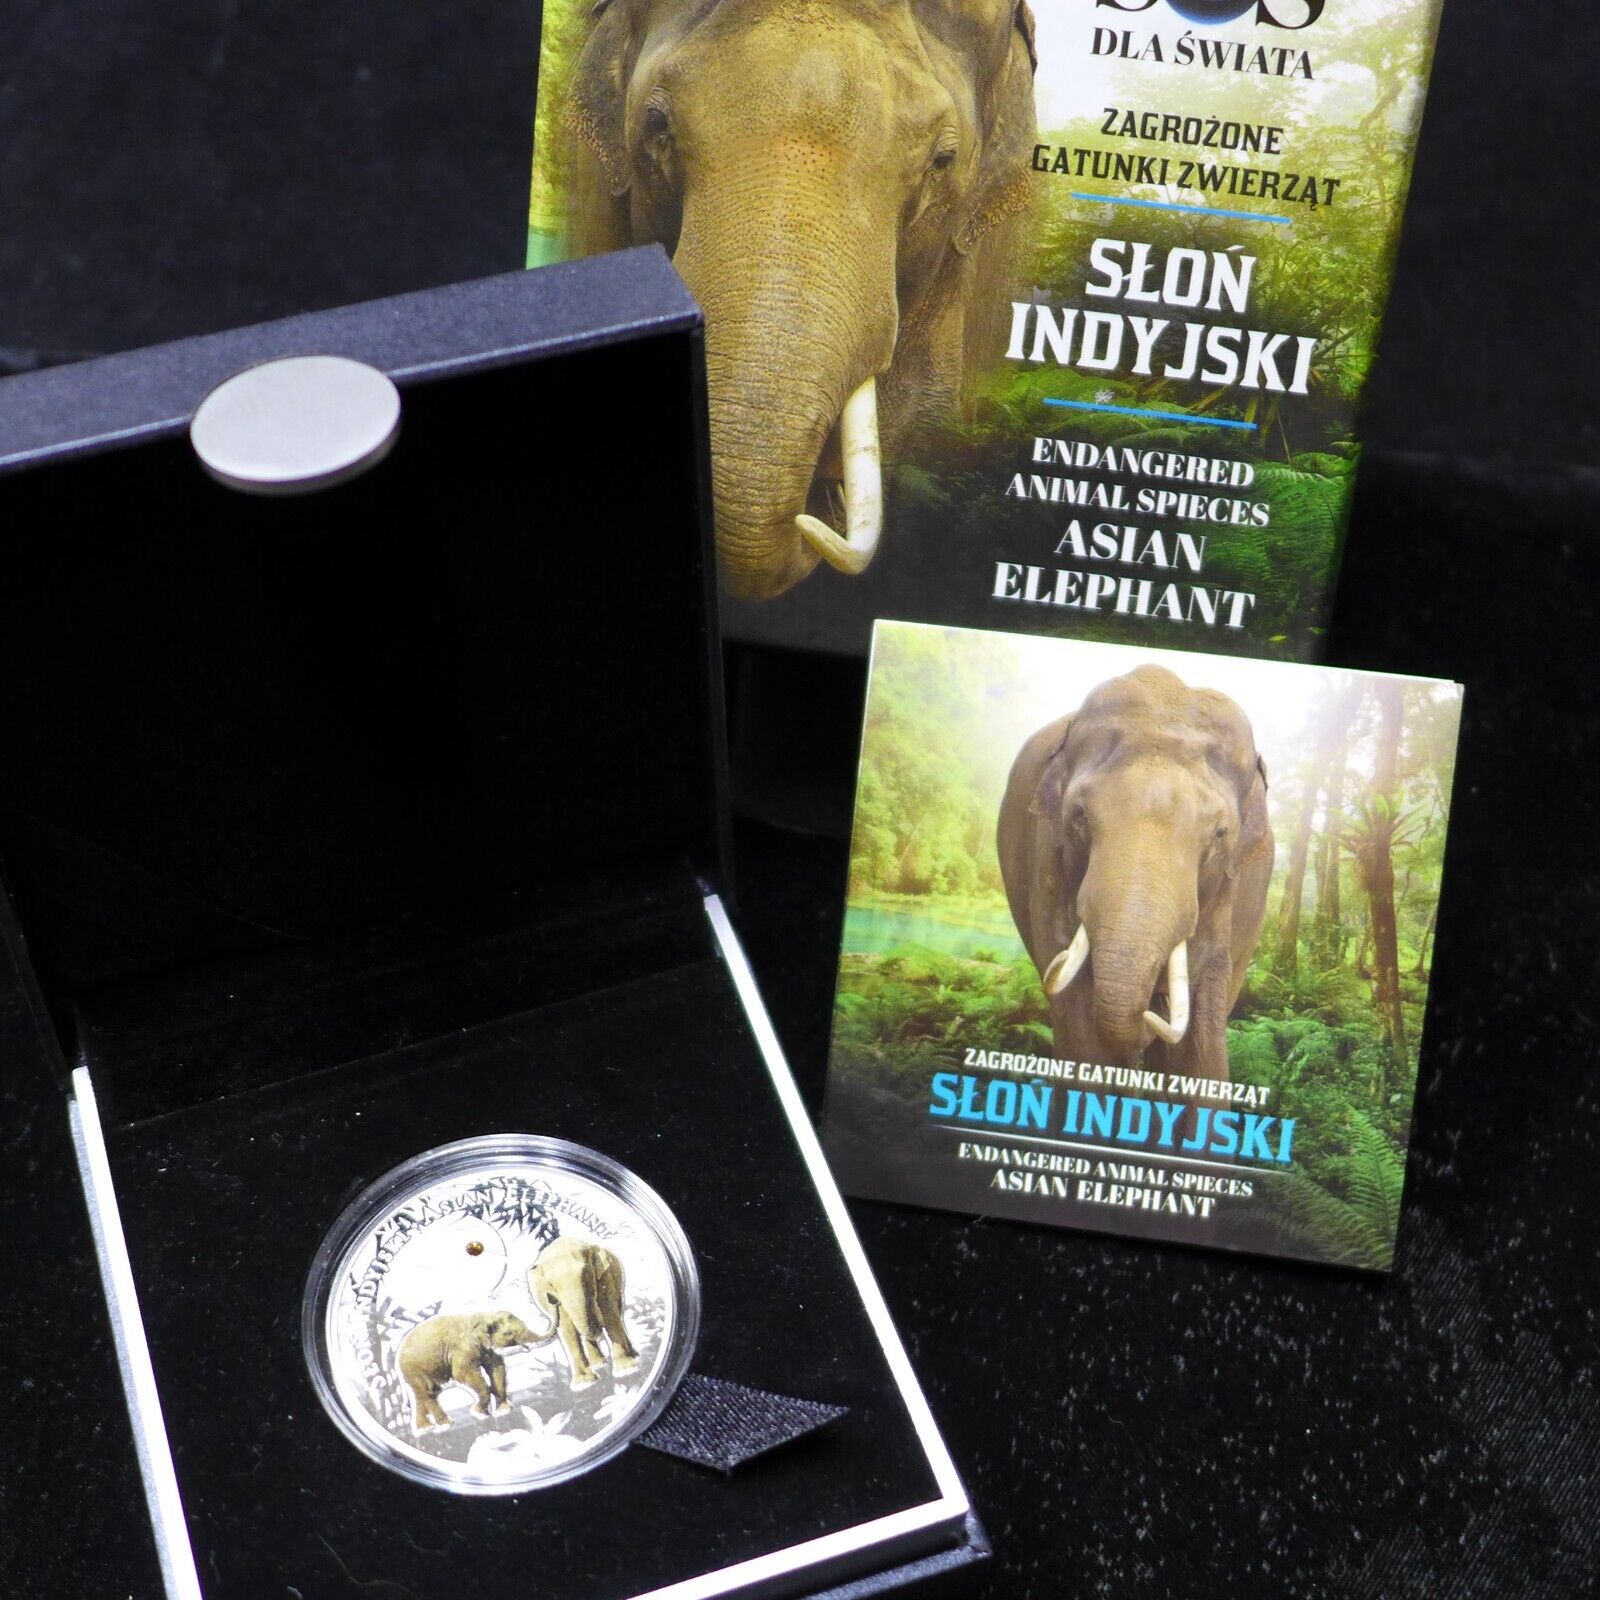 Niue 2016 $1.”asian Elephant" Endangered Animal Species Silver Proof Mintage 999